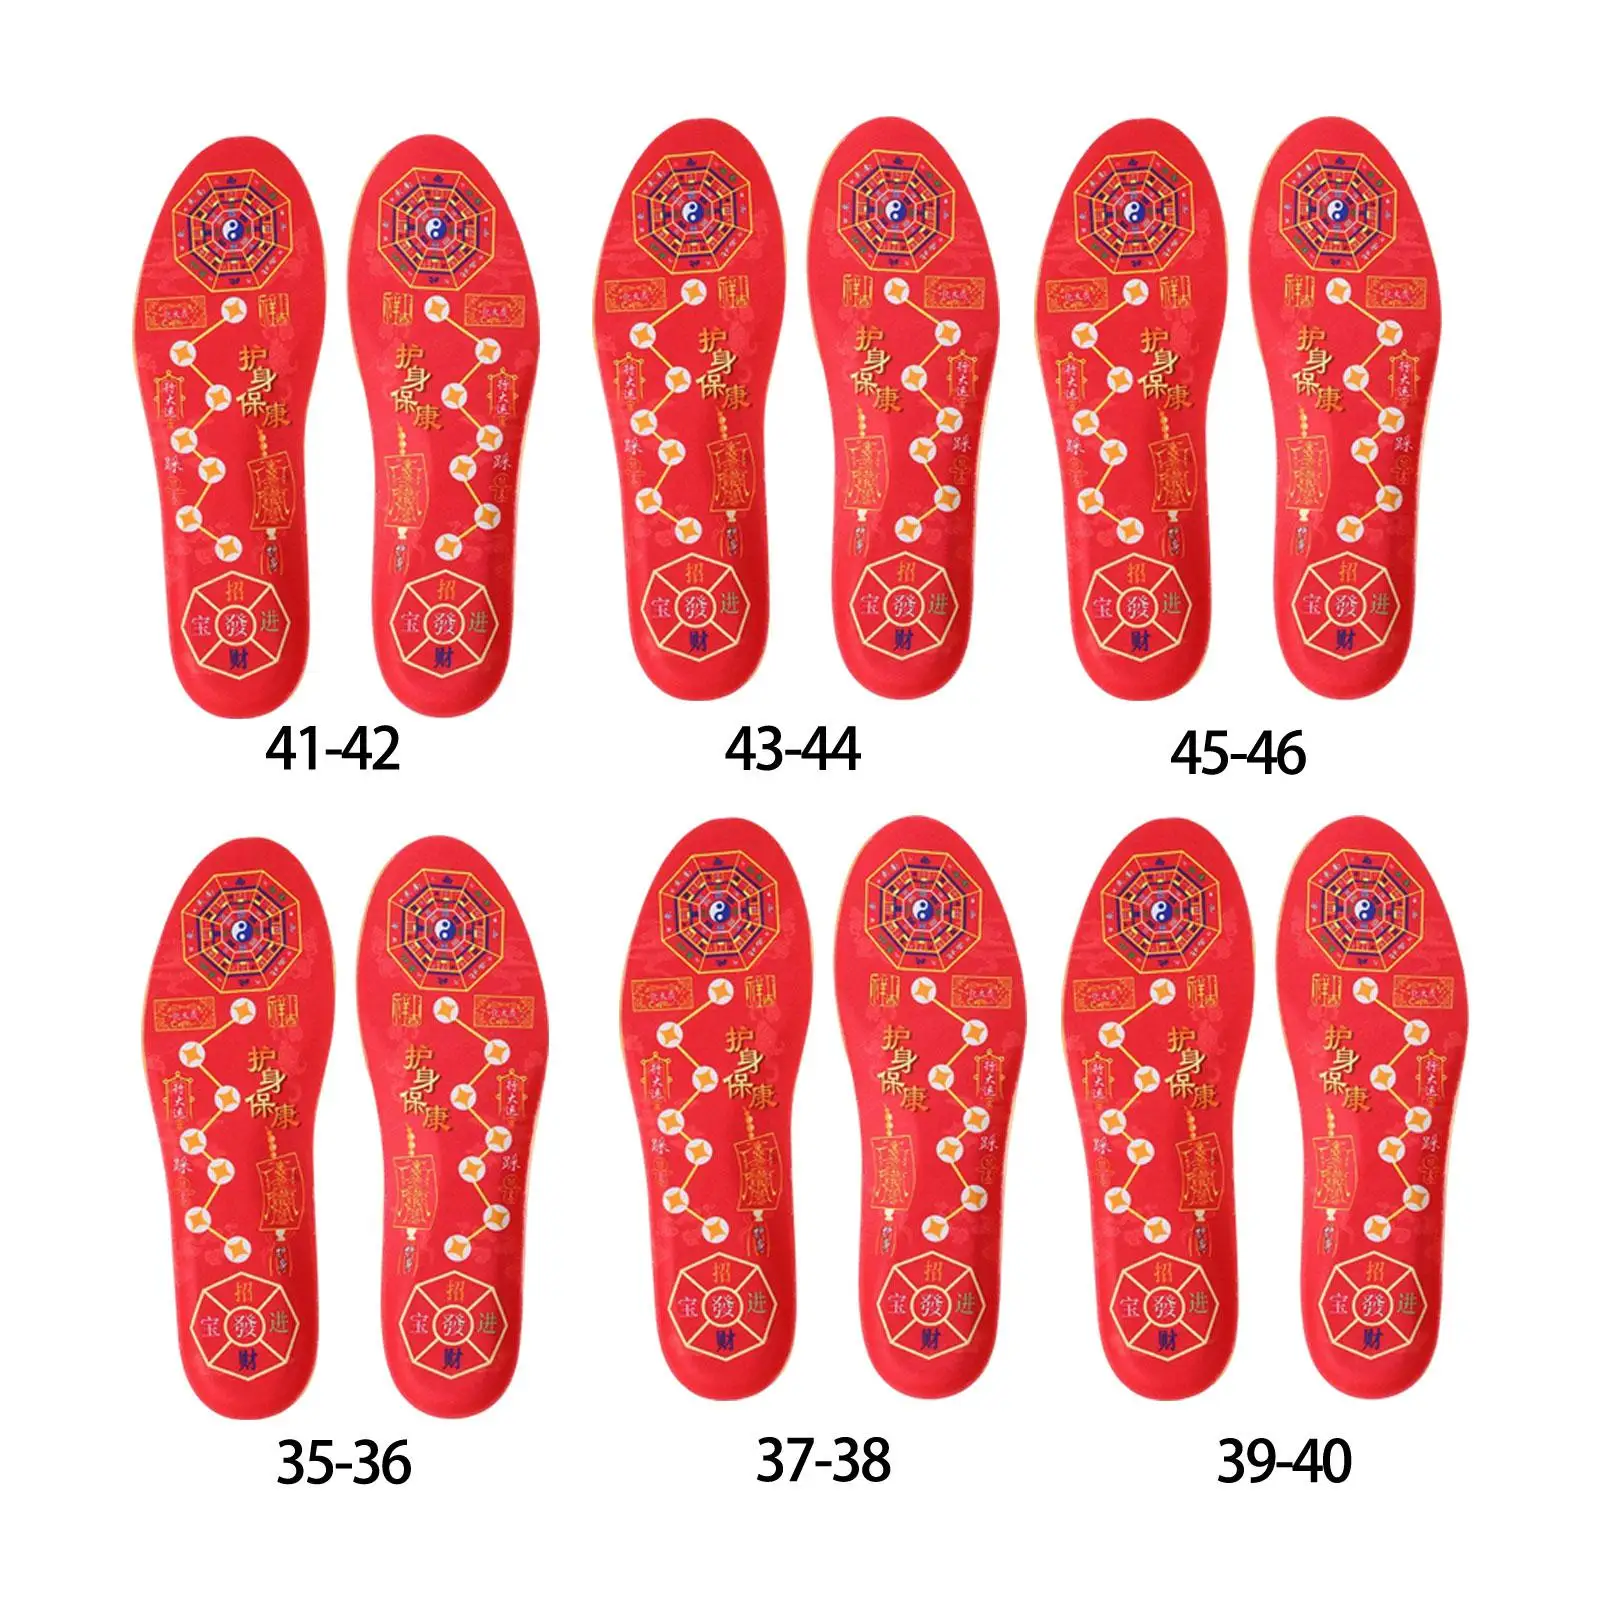 Cushion Insoles Men and Women Shock Absorption Foot Pads Replacement Soft Shoes Inserts for Sneakers Camping Backpacking Outdoor